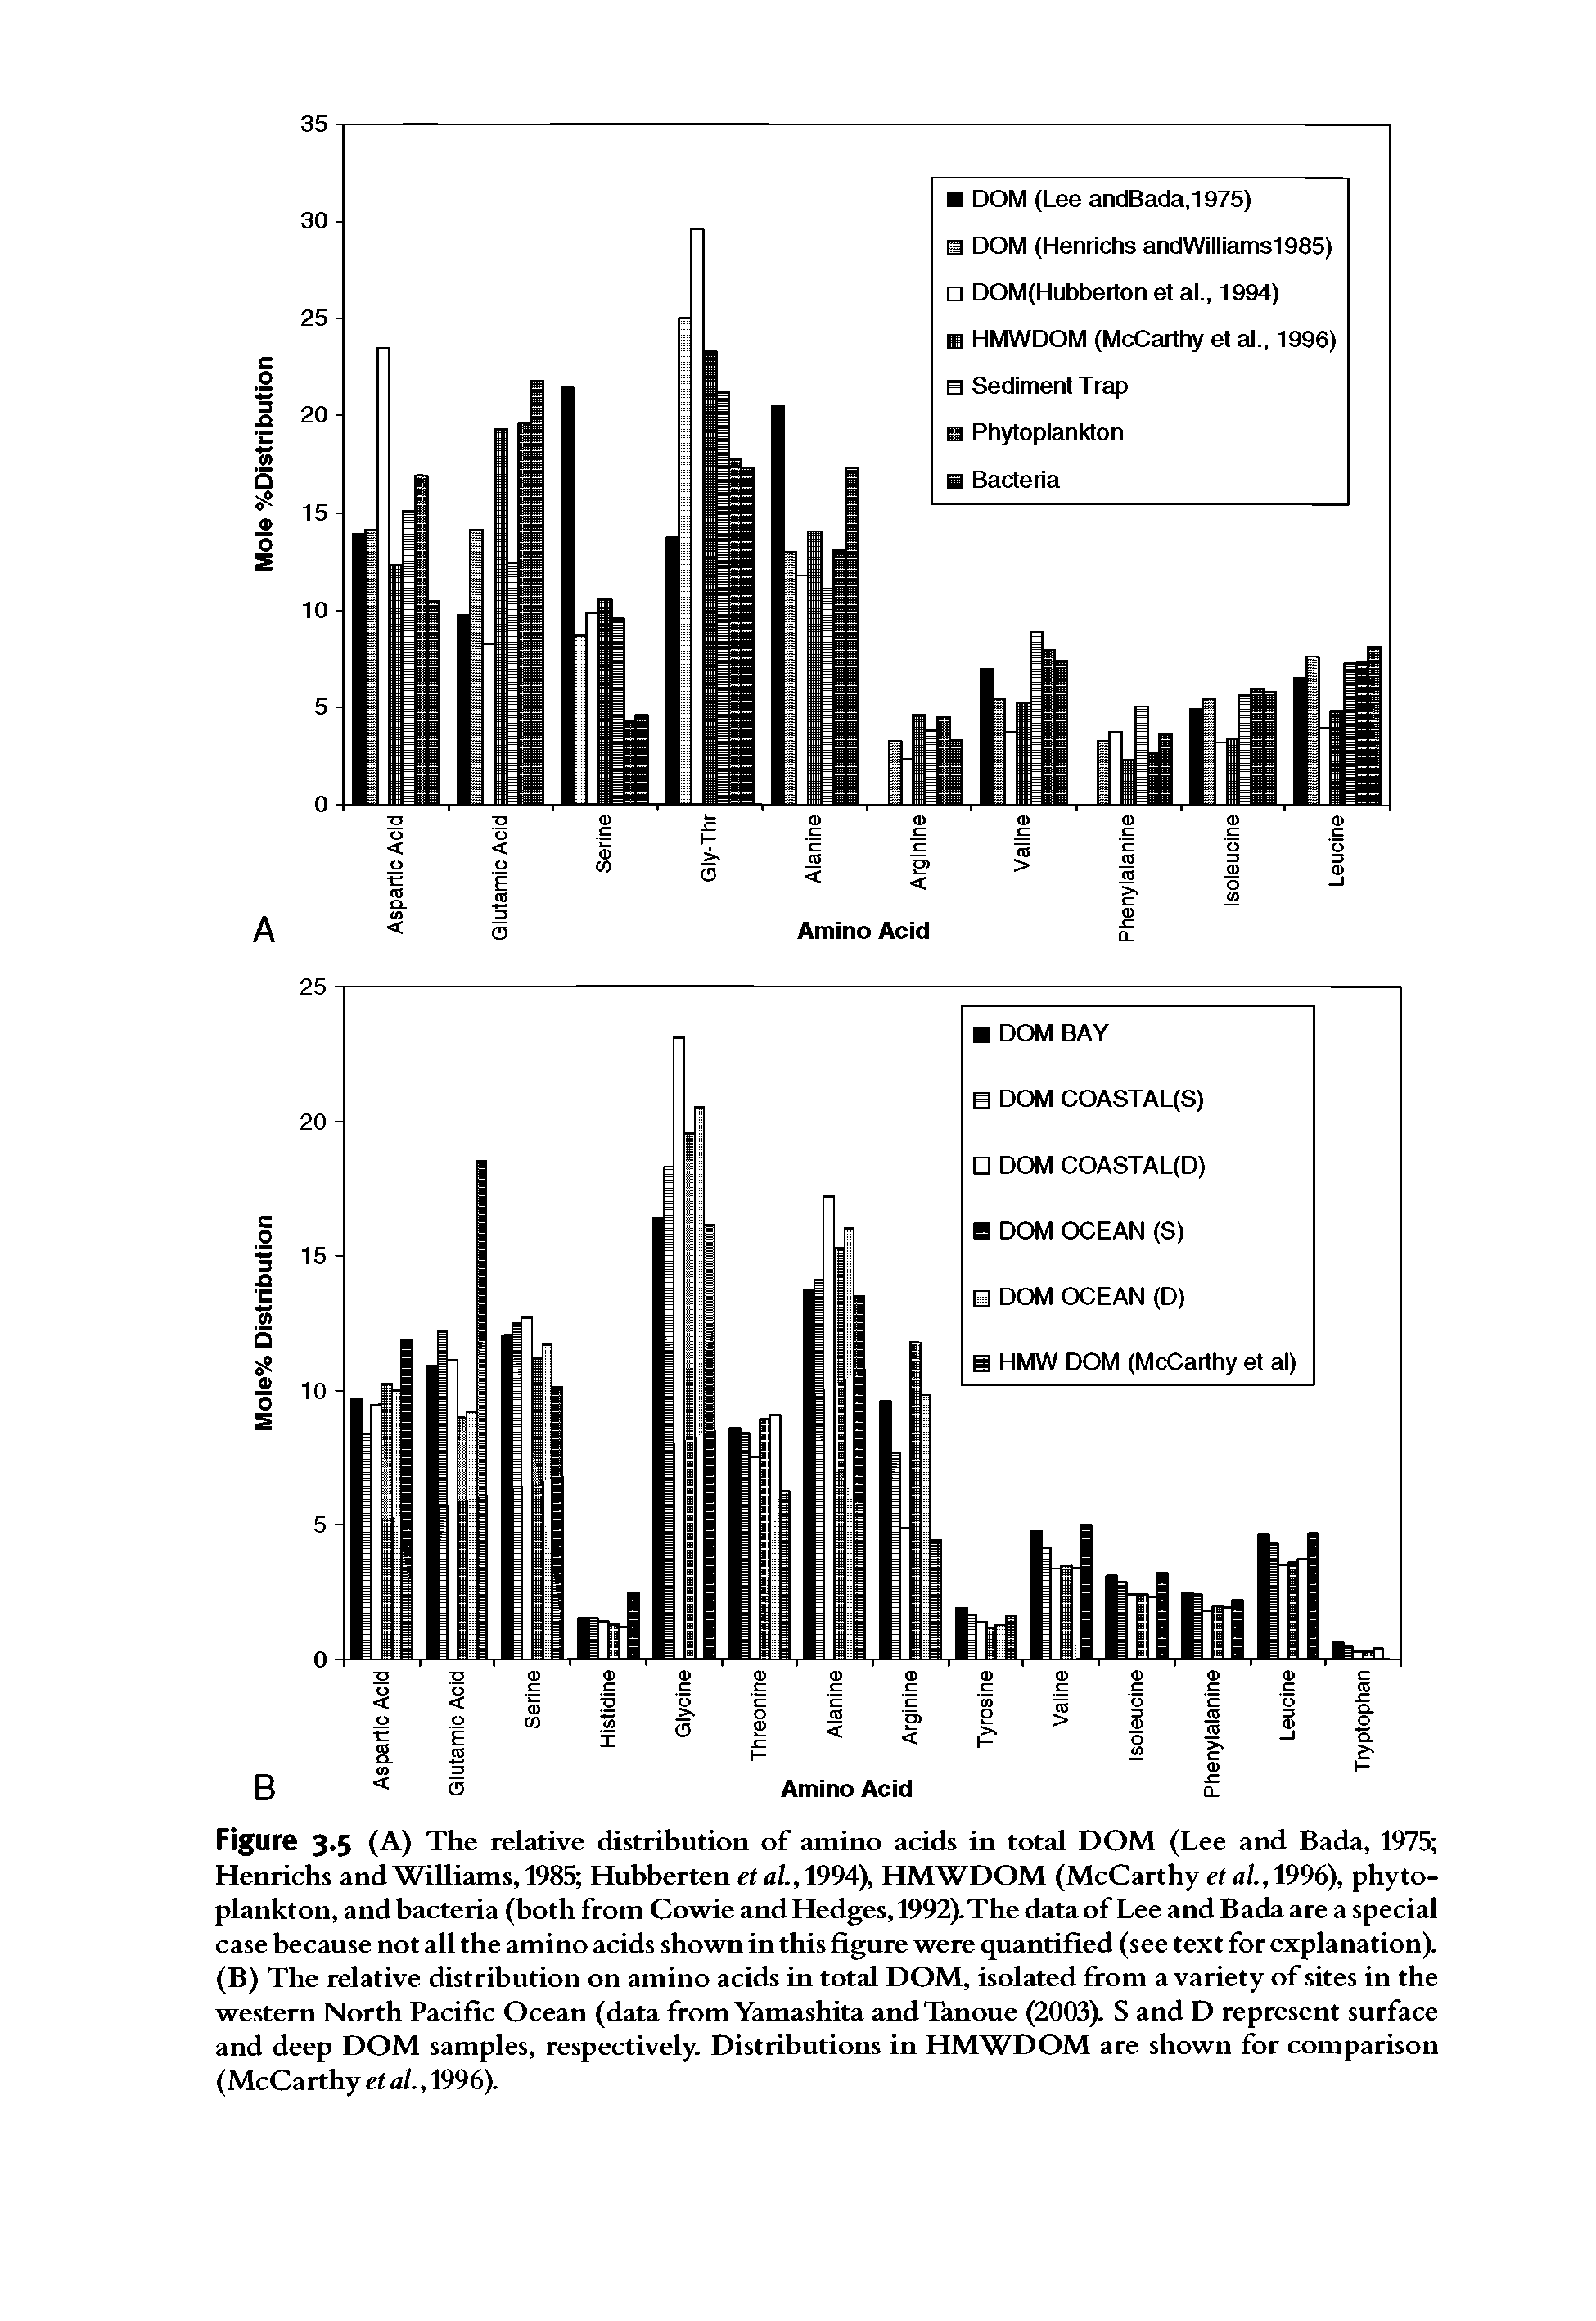 Figure 3.5 (A) The relative distribution of amino acids in total DOM (Lee and Bada, 1975 Henrichs and Williams, 1985 Hubberten et al., 1994), HMWDOM (McCarthy et al., 1996), phytoplankton, and bacteria (both from Cowie and Hedges, 1992).The data of Lee and Bada are a special case because not all the amino acids shown in this figure were quantified (see text for explanation). (B) The relative distribution on amino acids in total DOM, isolated from a variety of sites in the western North Pacific Ocean (data from Yamashita andTanoue (2003). S and D represent surface and deep DOM samples, respectively. Distributions in HMWDOM are shown for comparison (McCarthy et al., 1996).